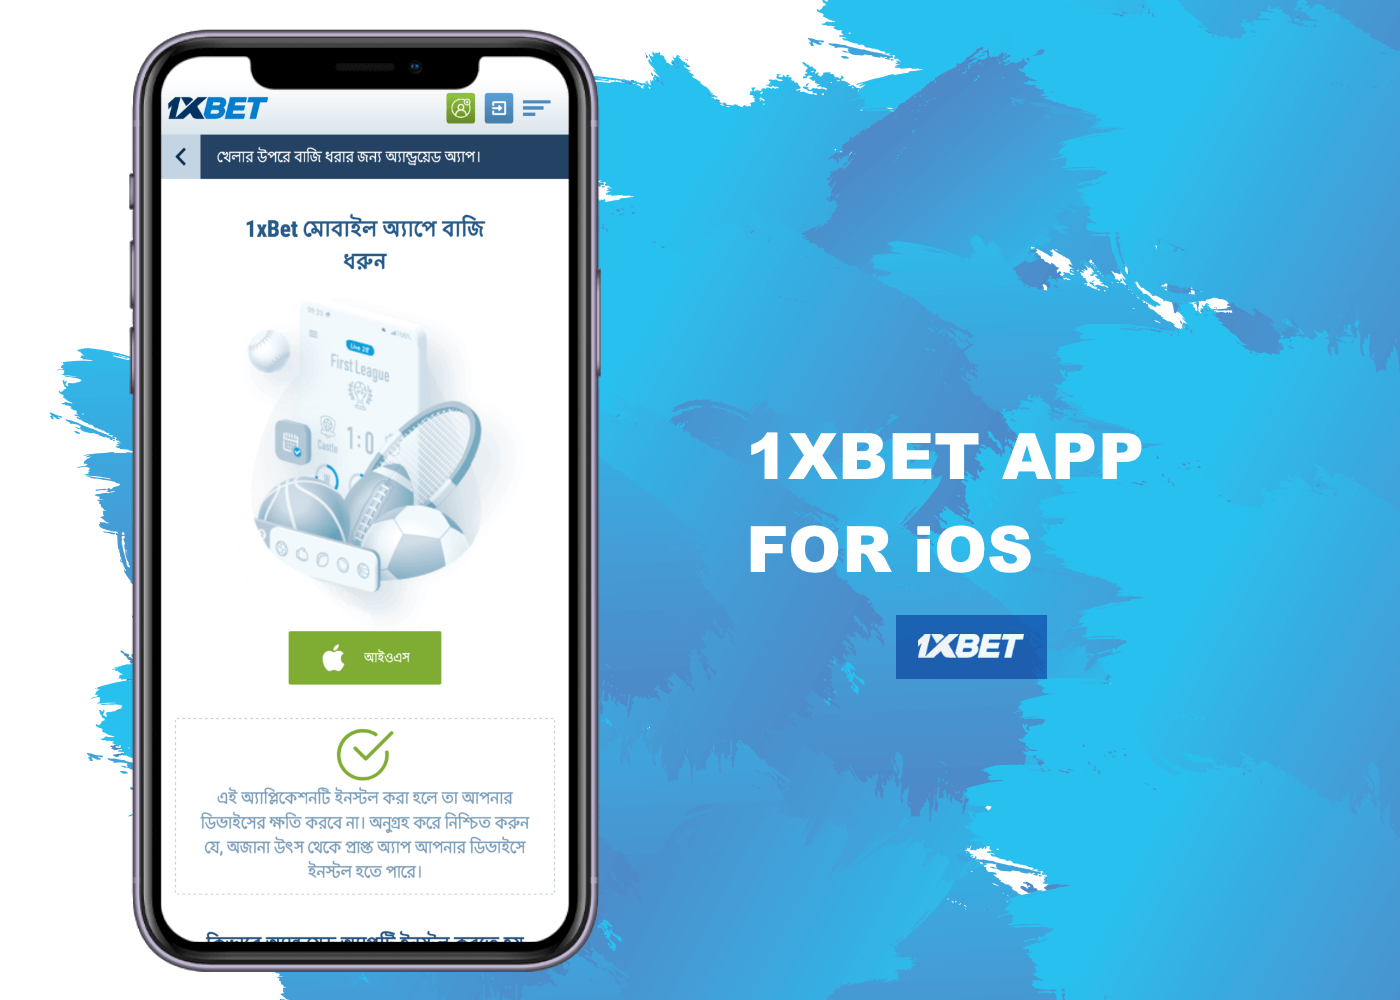 Detailed instructions on how to download the app 1xbet on iPhone and iPad